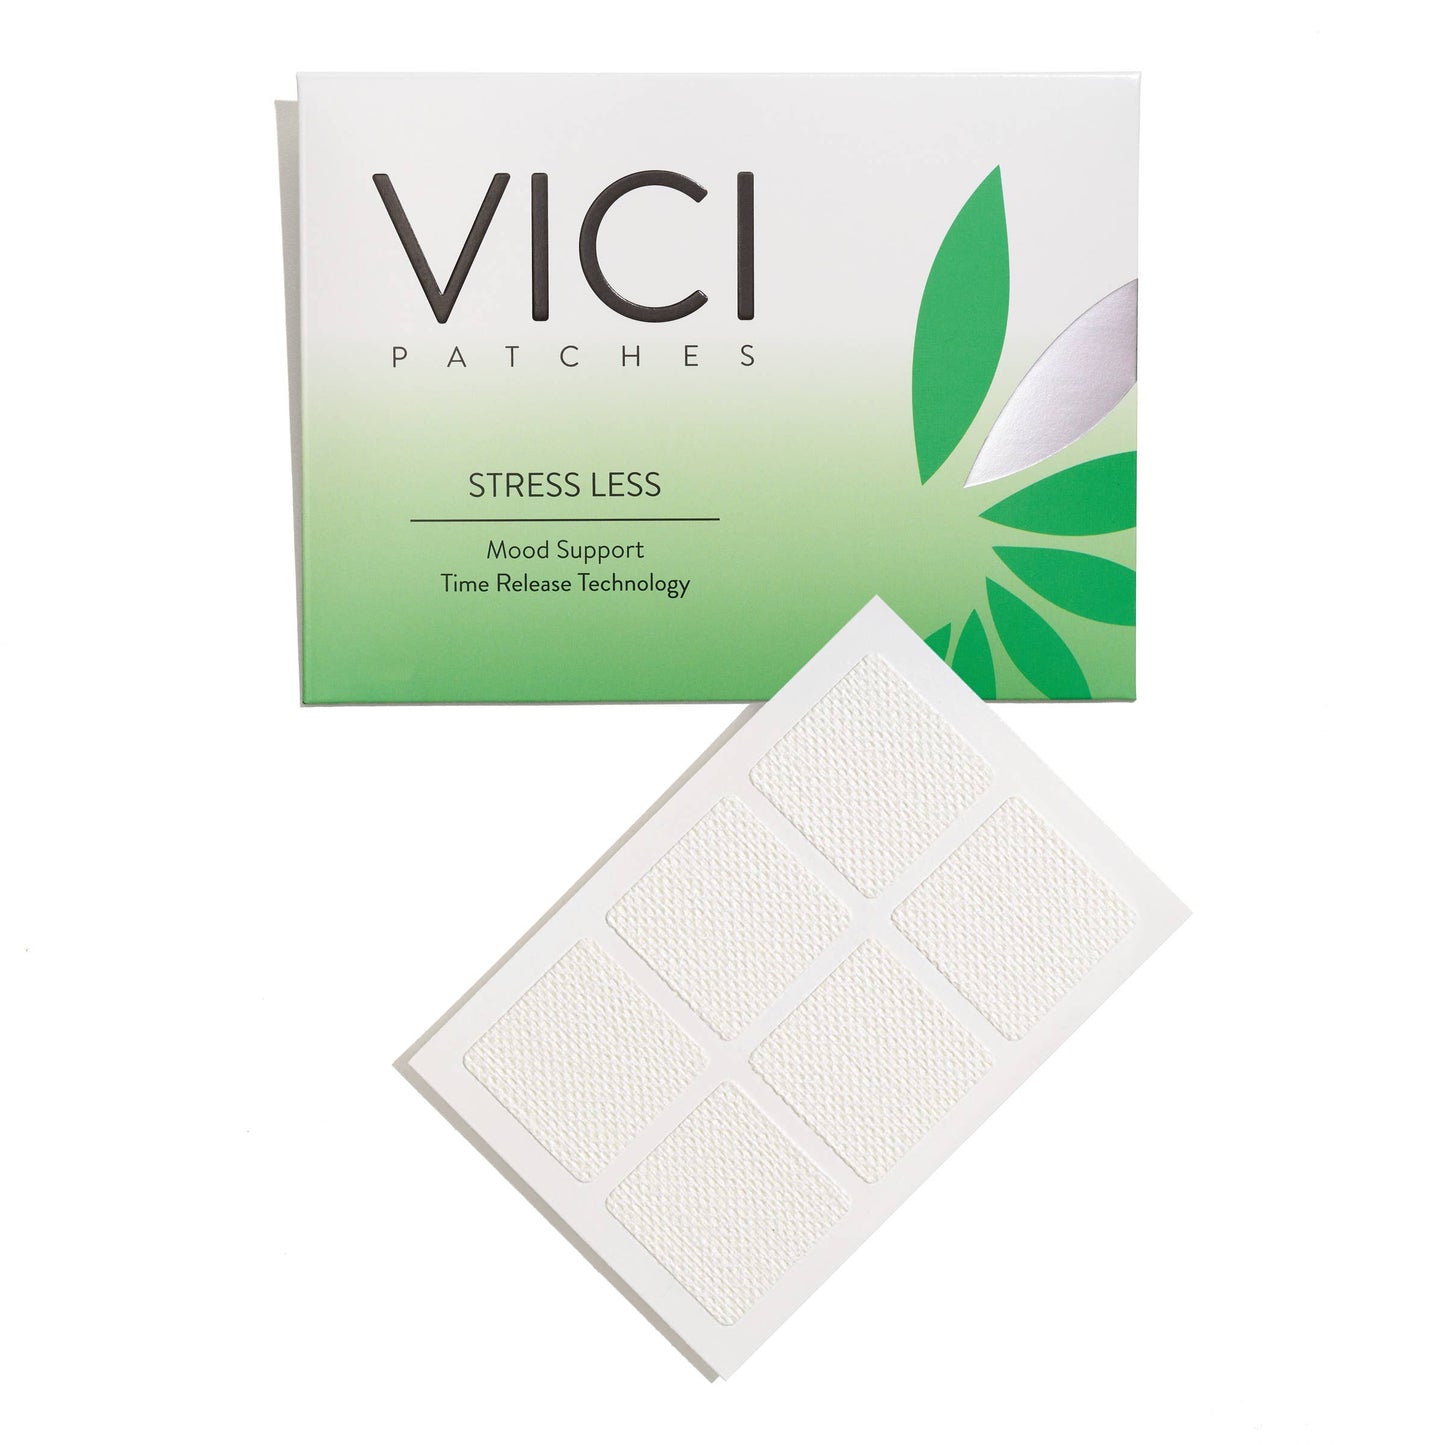 VICI Wellness "Stress Less" Stress Support/Relief Topical Patches (6)